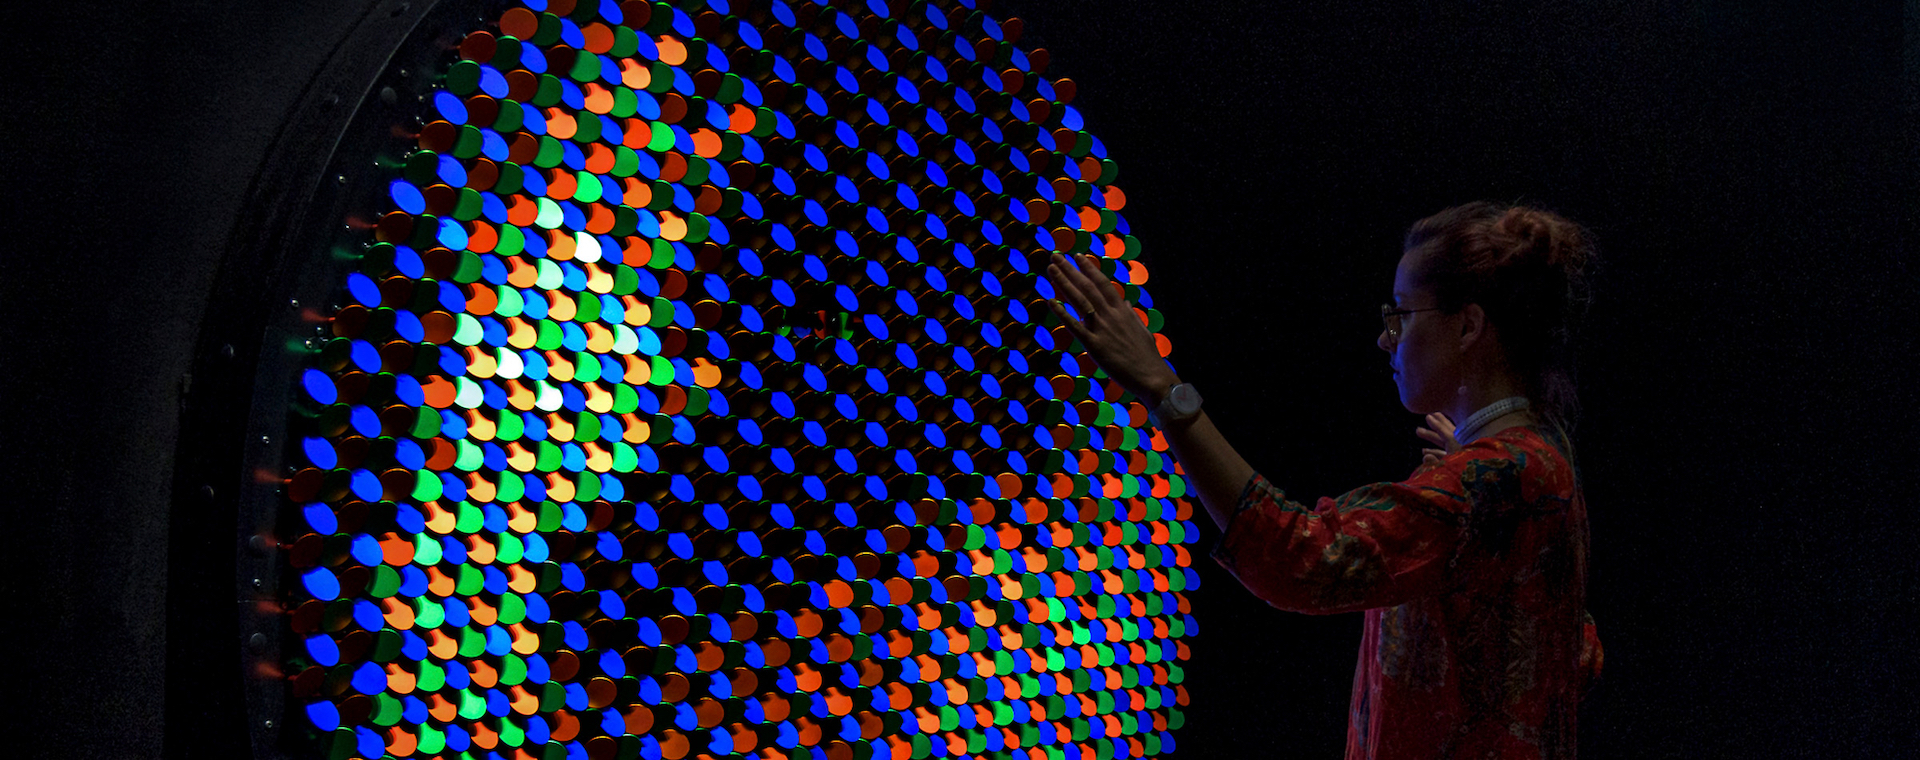 Woman looking into a multi-colored panel of lights